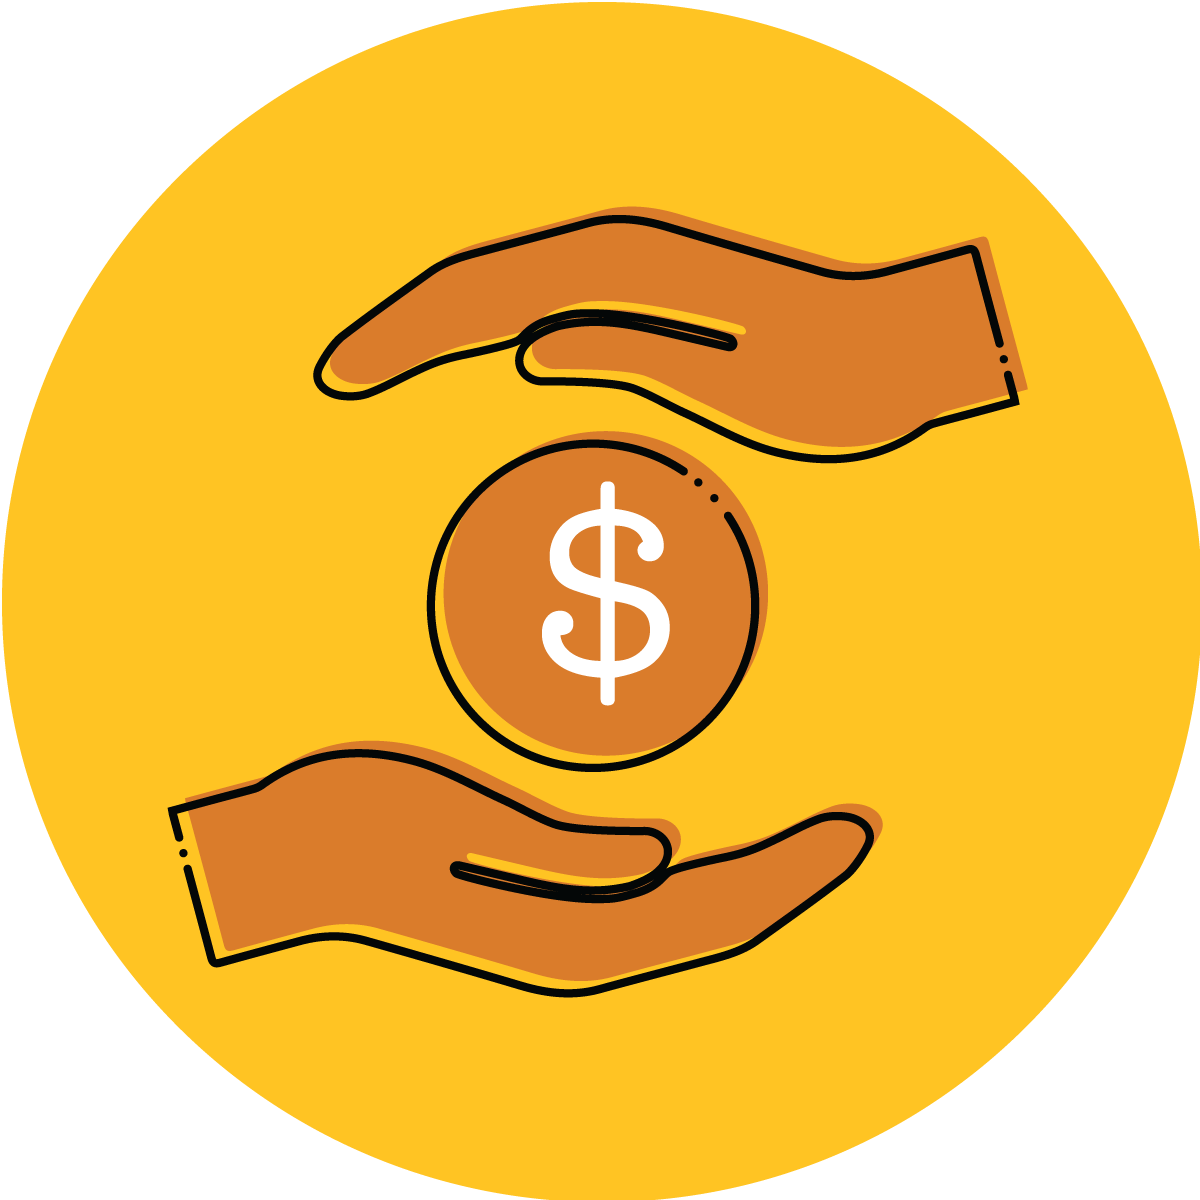 Icon of hands above and below a dollar sign.